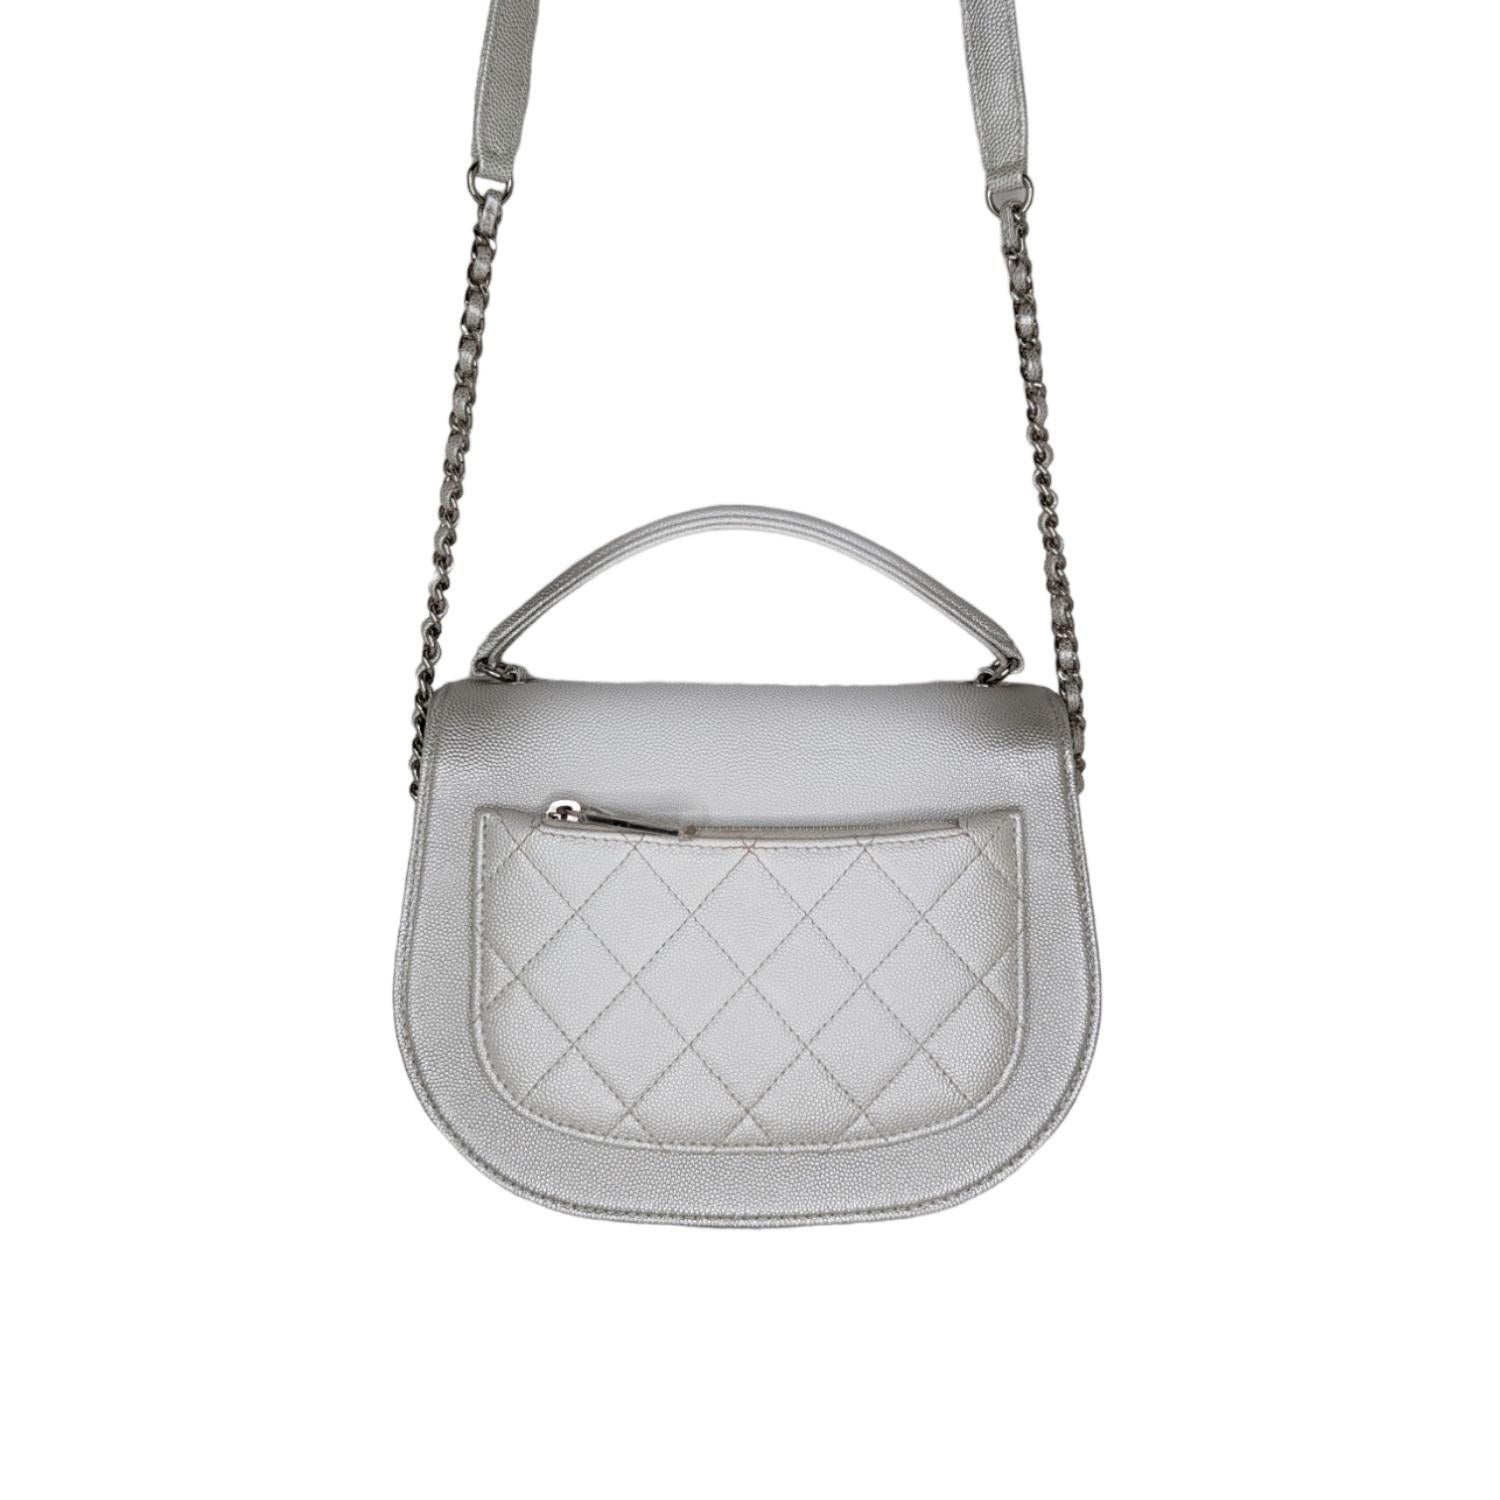 This chic shoulder bag is crafted of quilted goatskin leather in silver and white. The handbag features an aged silver chain link leather threaded shoulder strap and chain link top handle, an exterior zippered pocket and a rounded front flap with a